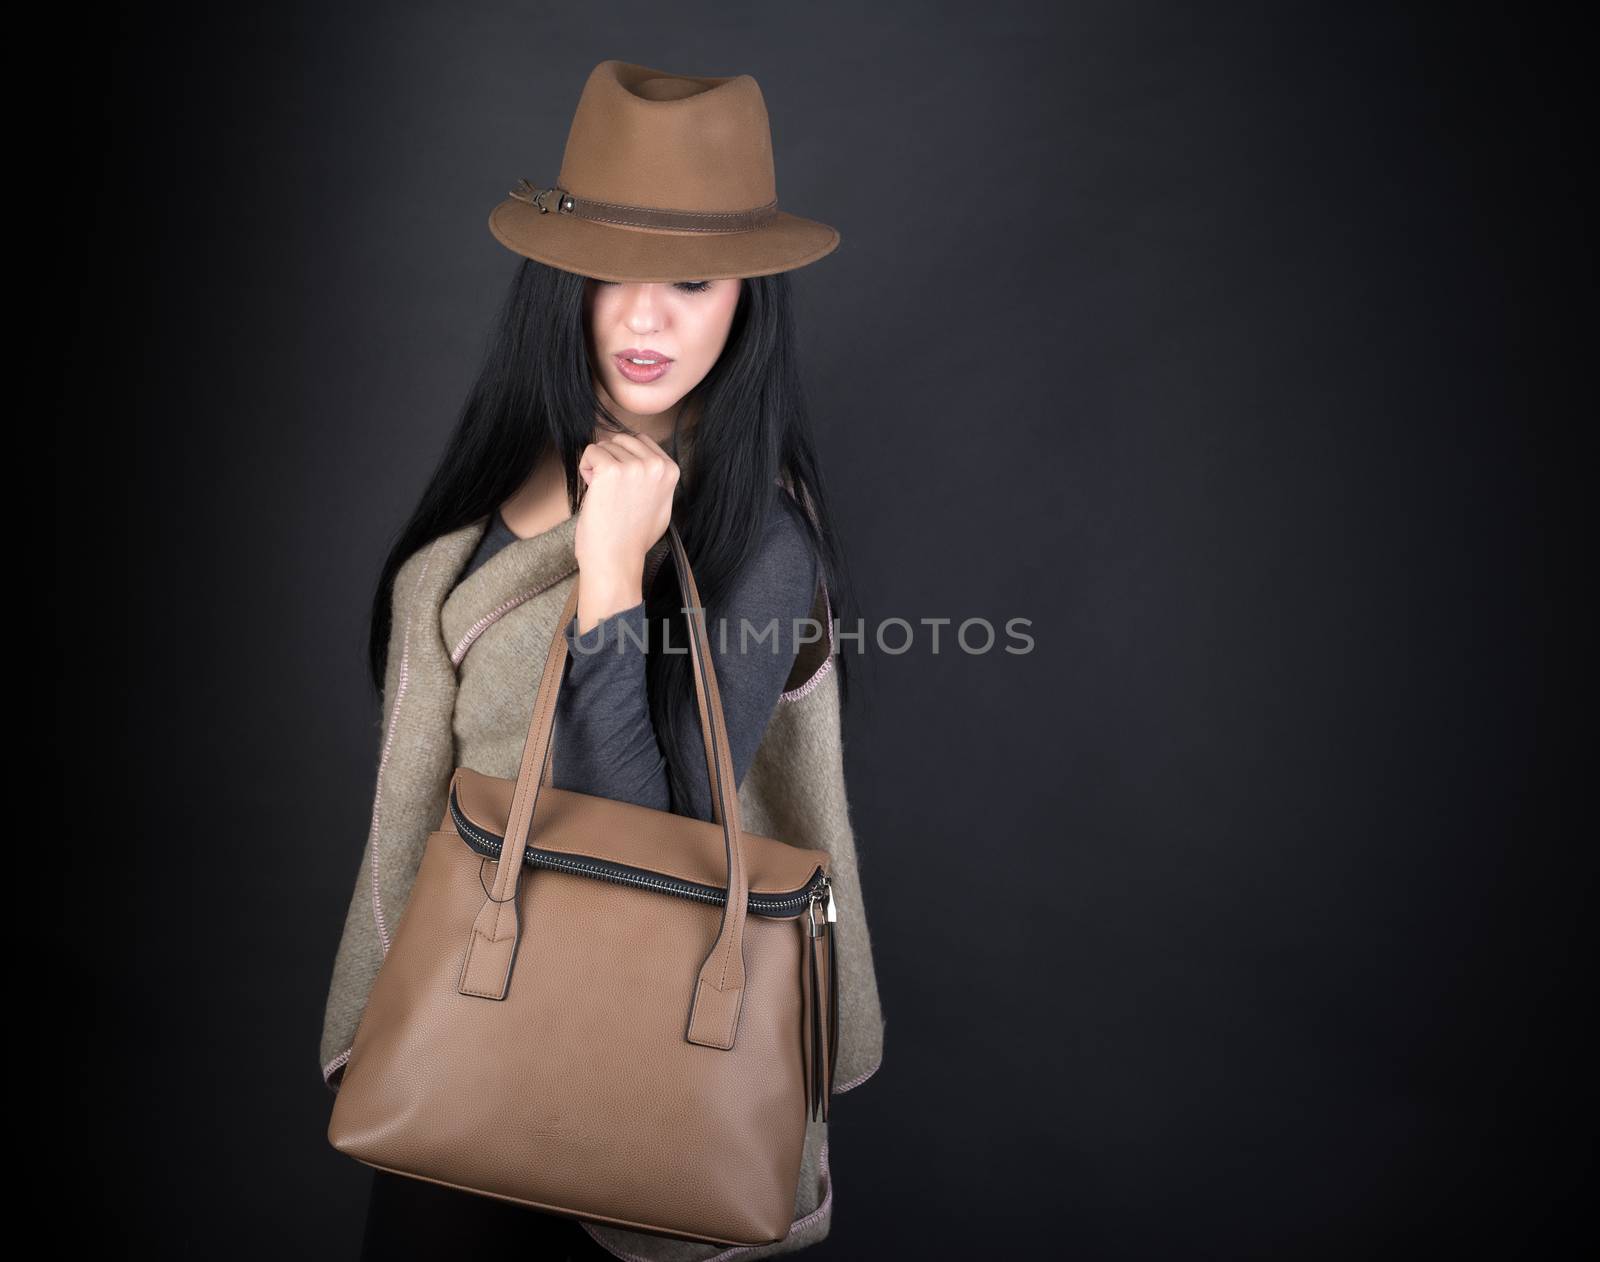 Fashion beautiful woman in country outfit, hat and bag on black background
